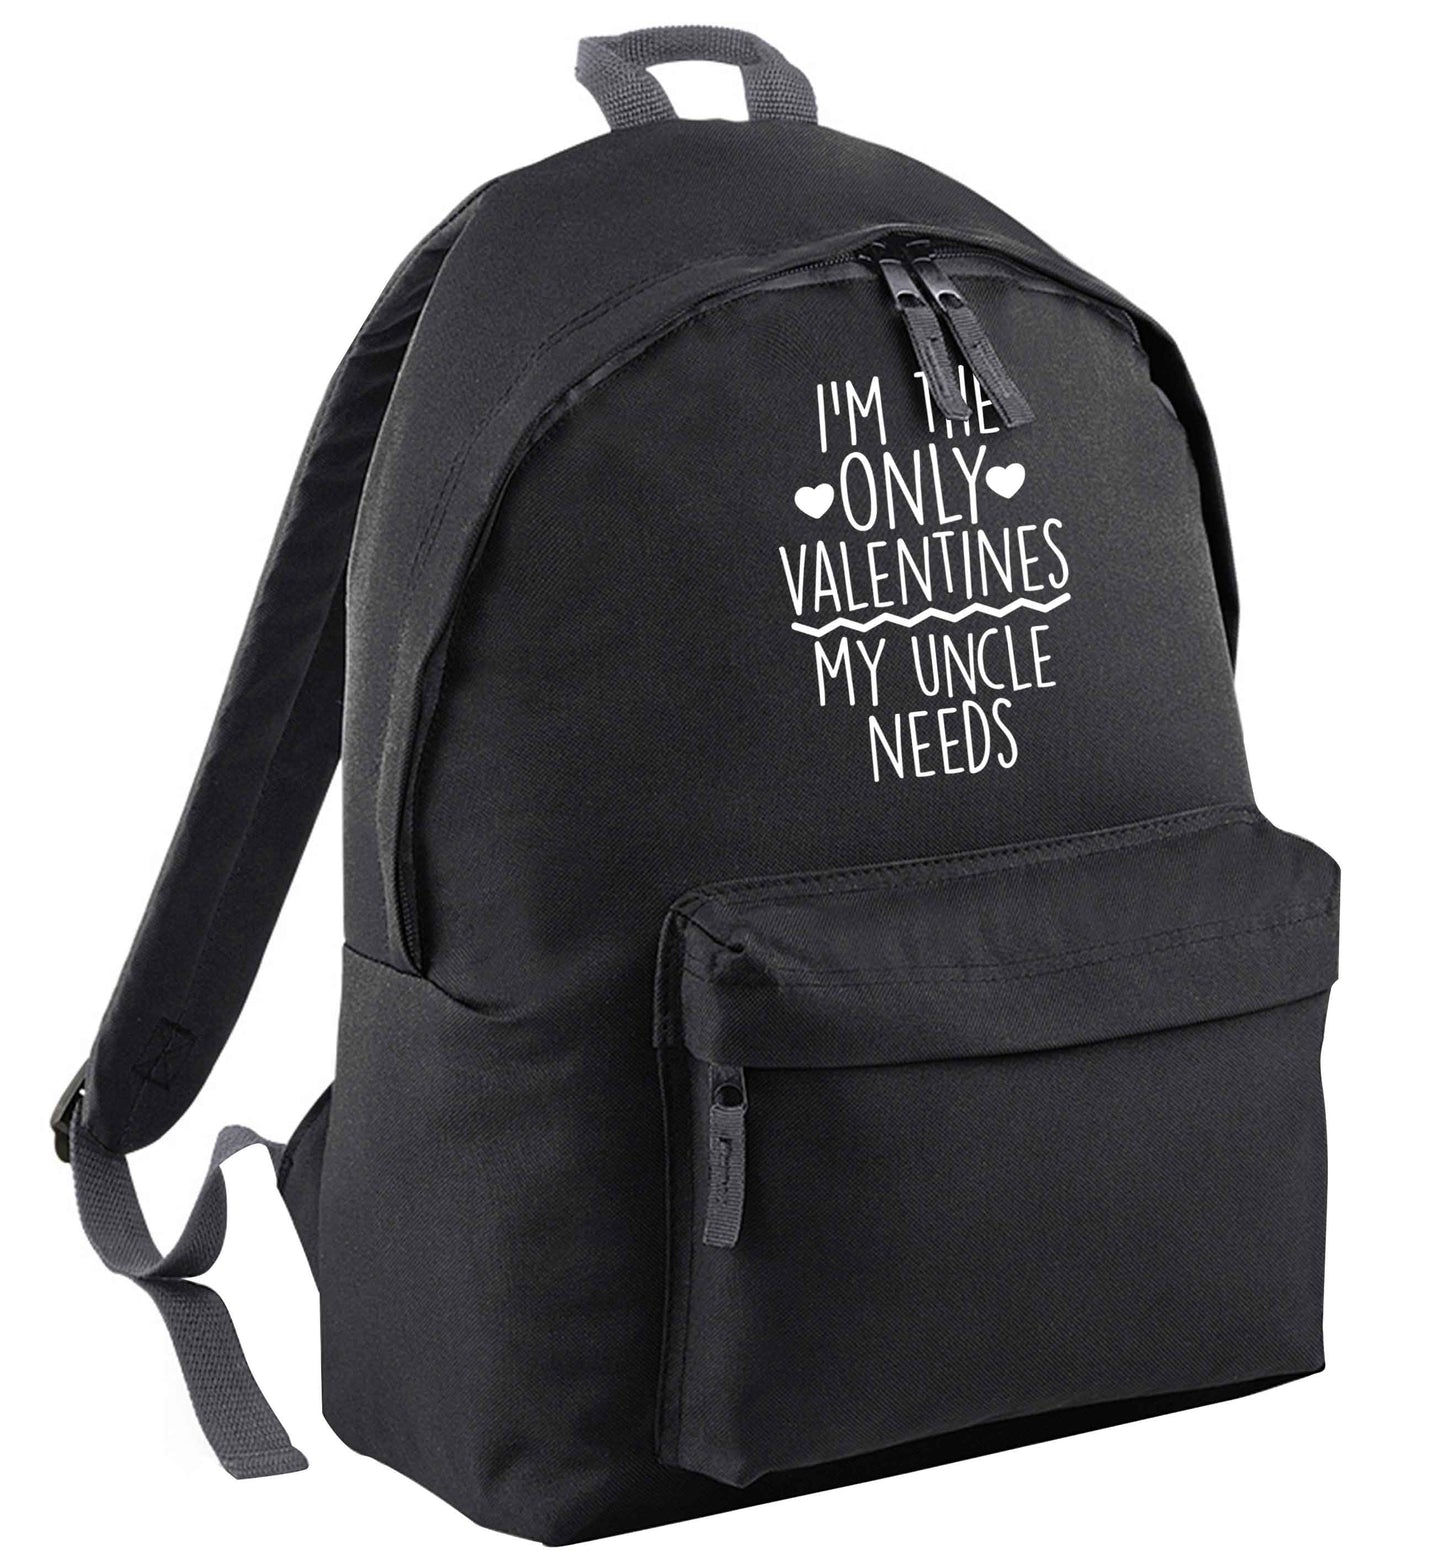 I'm the only valentines my uncle needs | Children's backpack